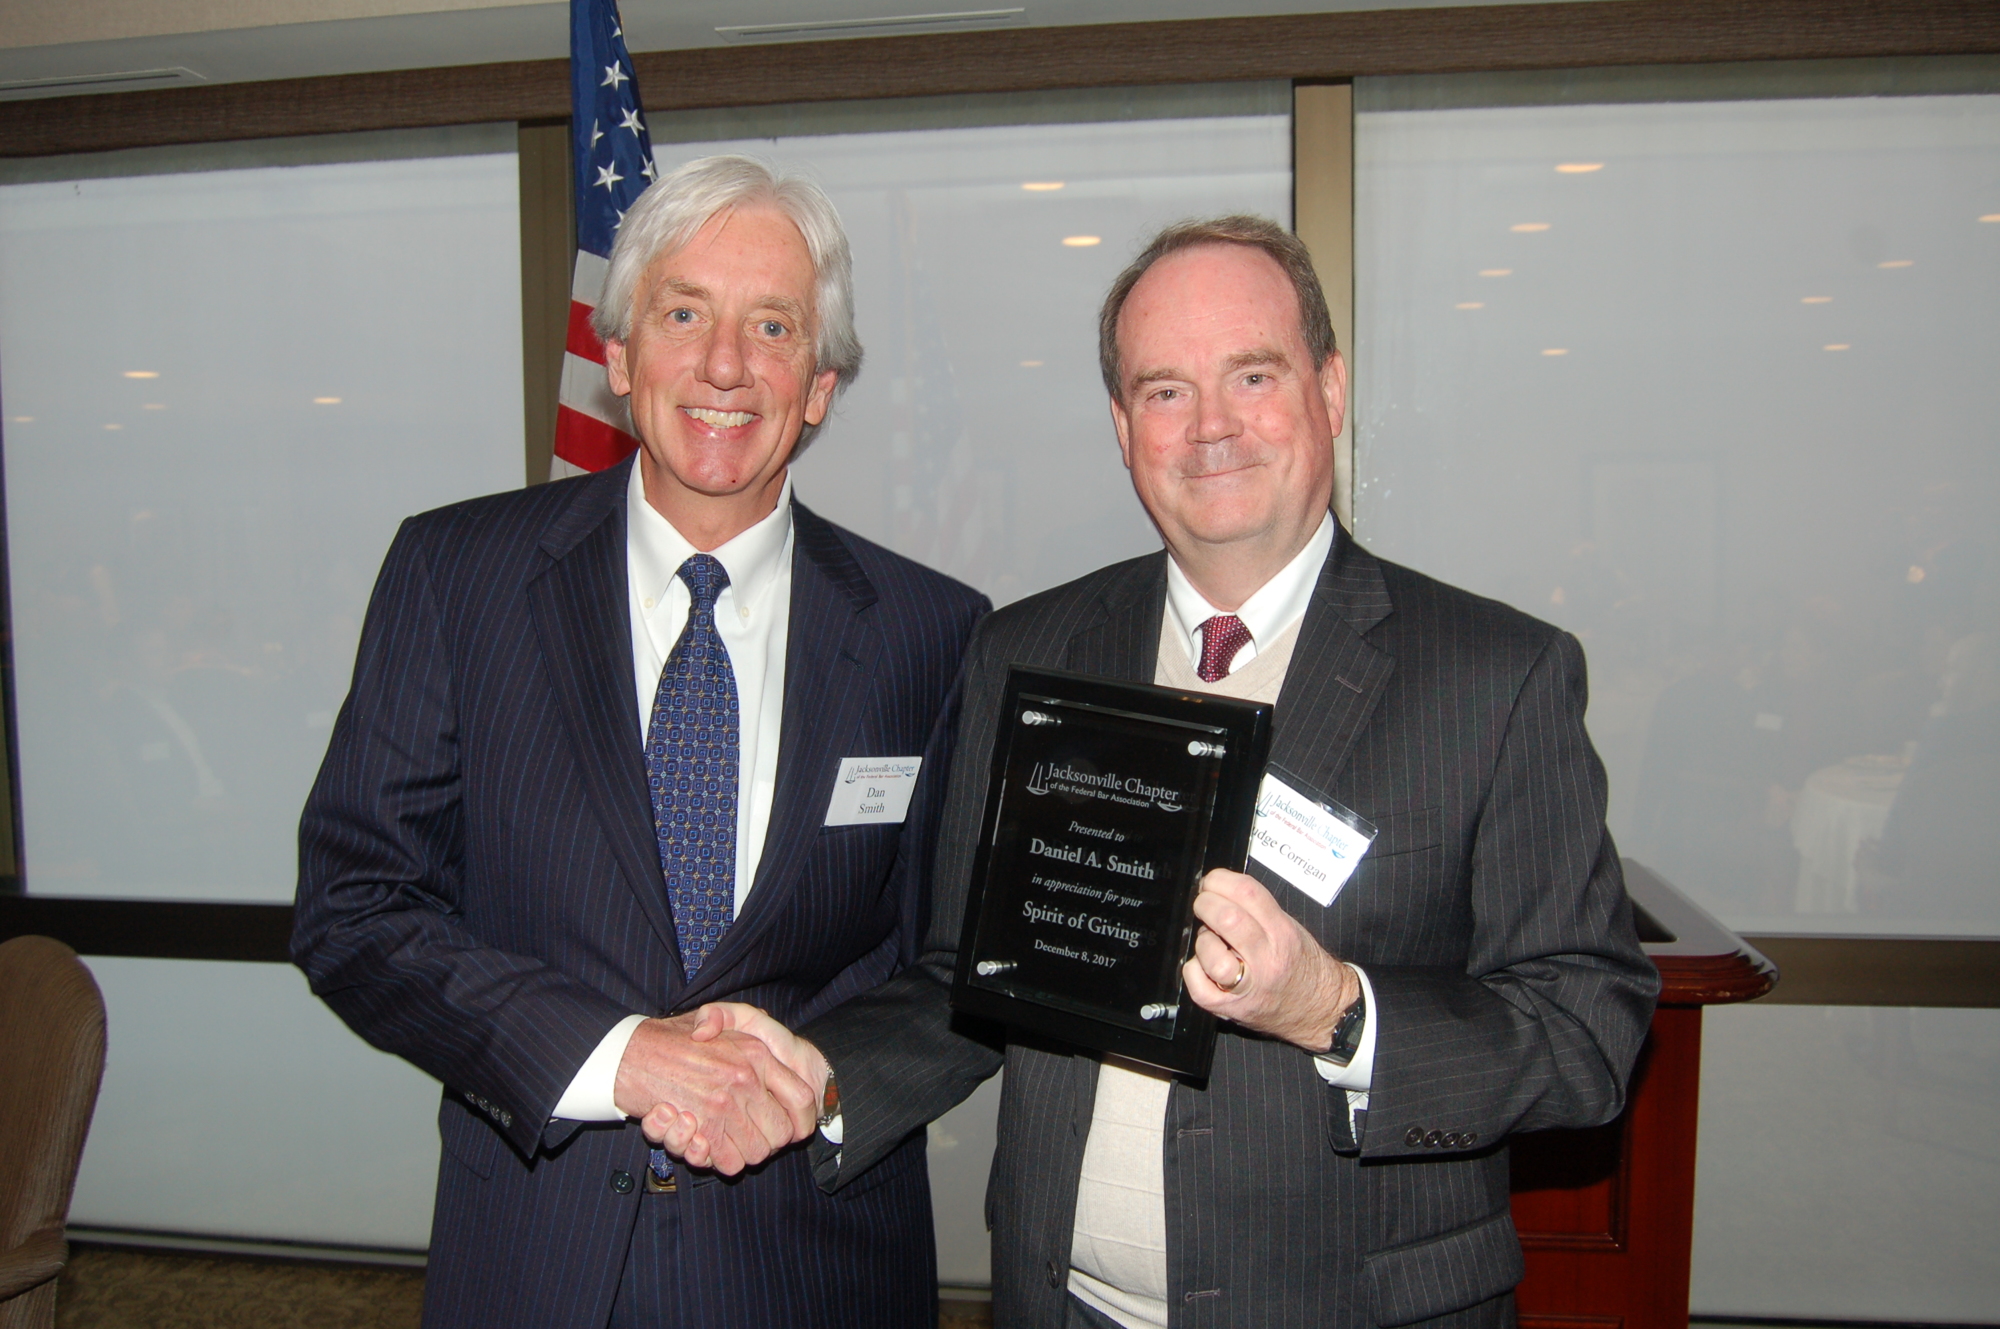 U.S. District Judge Timothy Corrigan, right, presented the Jacksonville Chapter of the Federal Bar Association’s 2017 Spirit of Giving Award to attorney Daniel Smith.